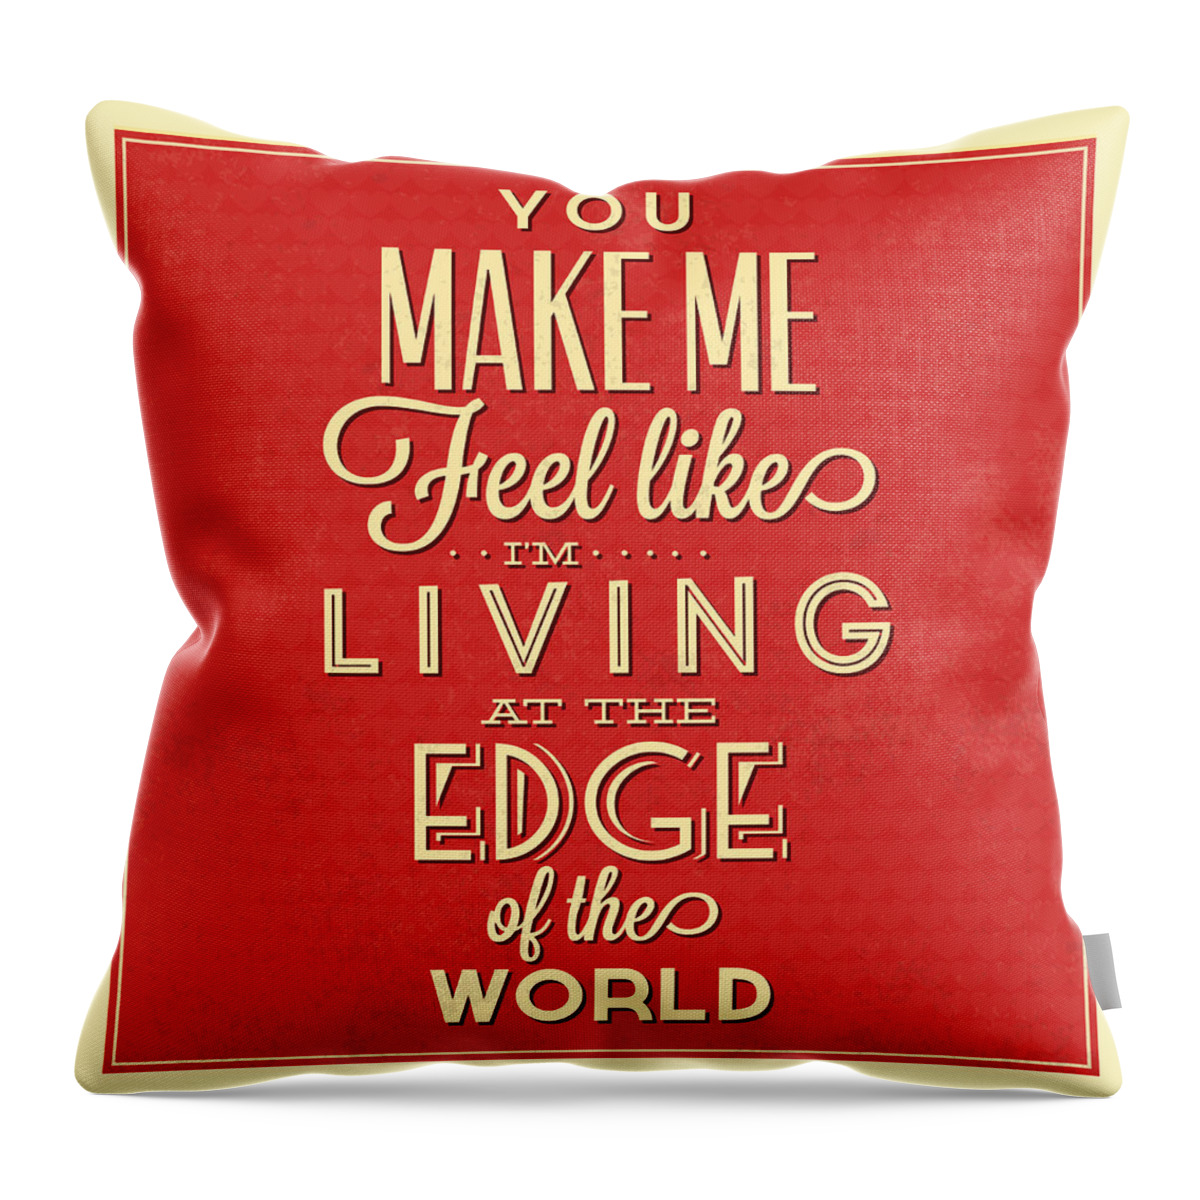 Motivation Throw Pillow featuring the digital art Living At The Edge by Naxart Studio